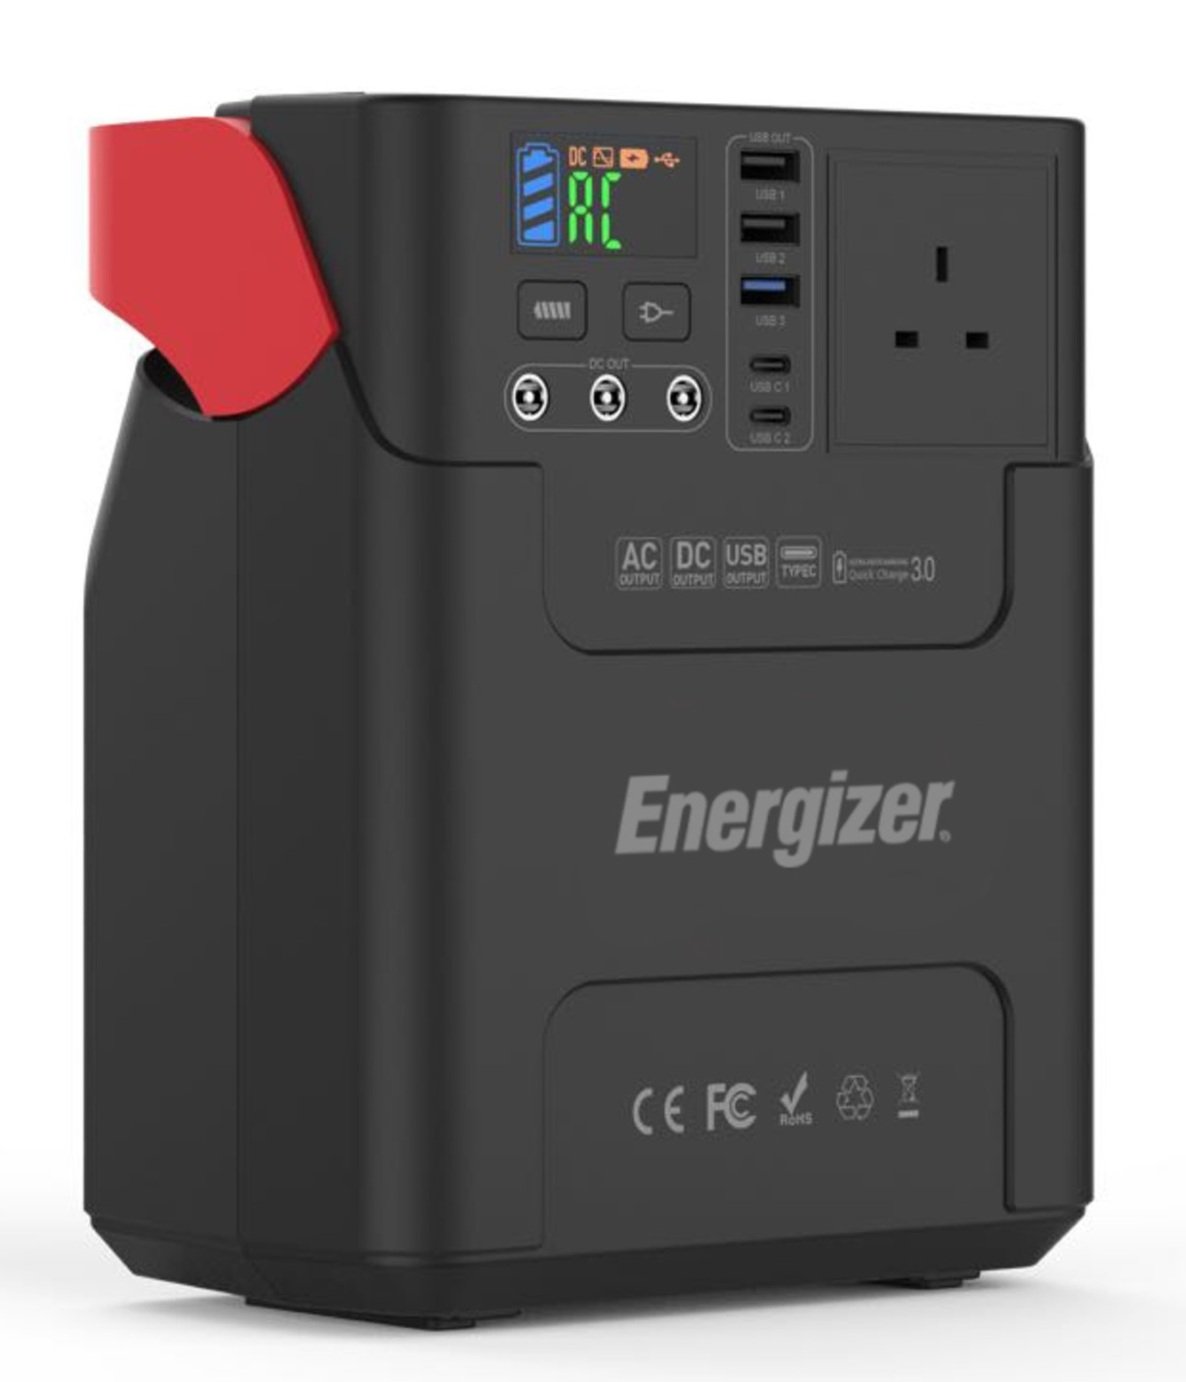 Energizer 222wH Portable Power Station Review